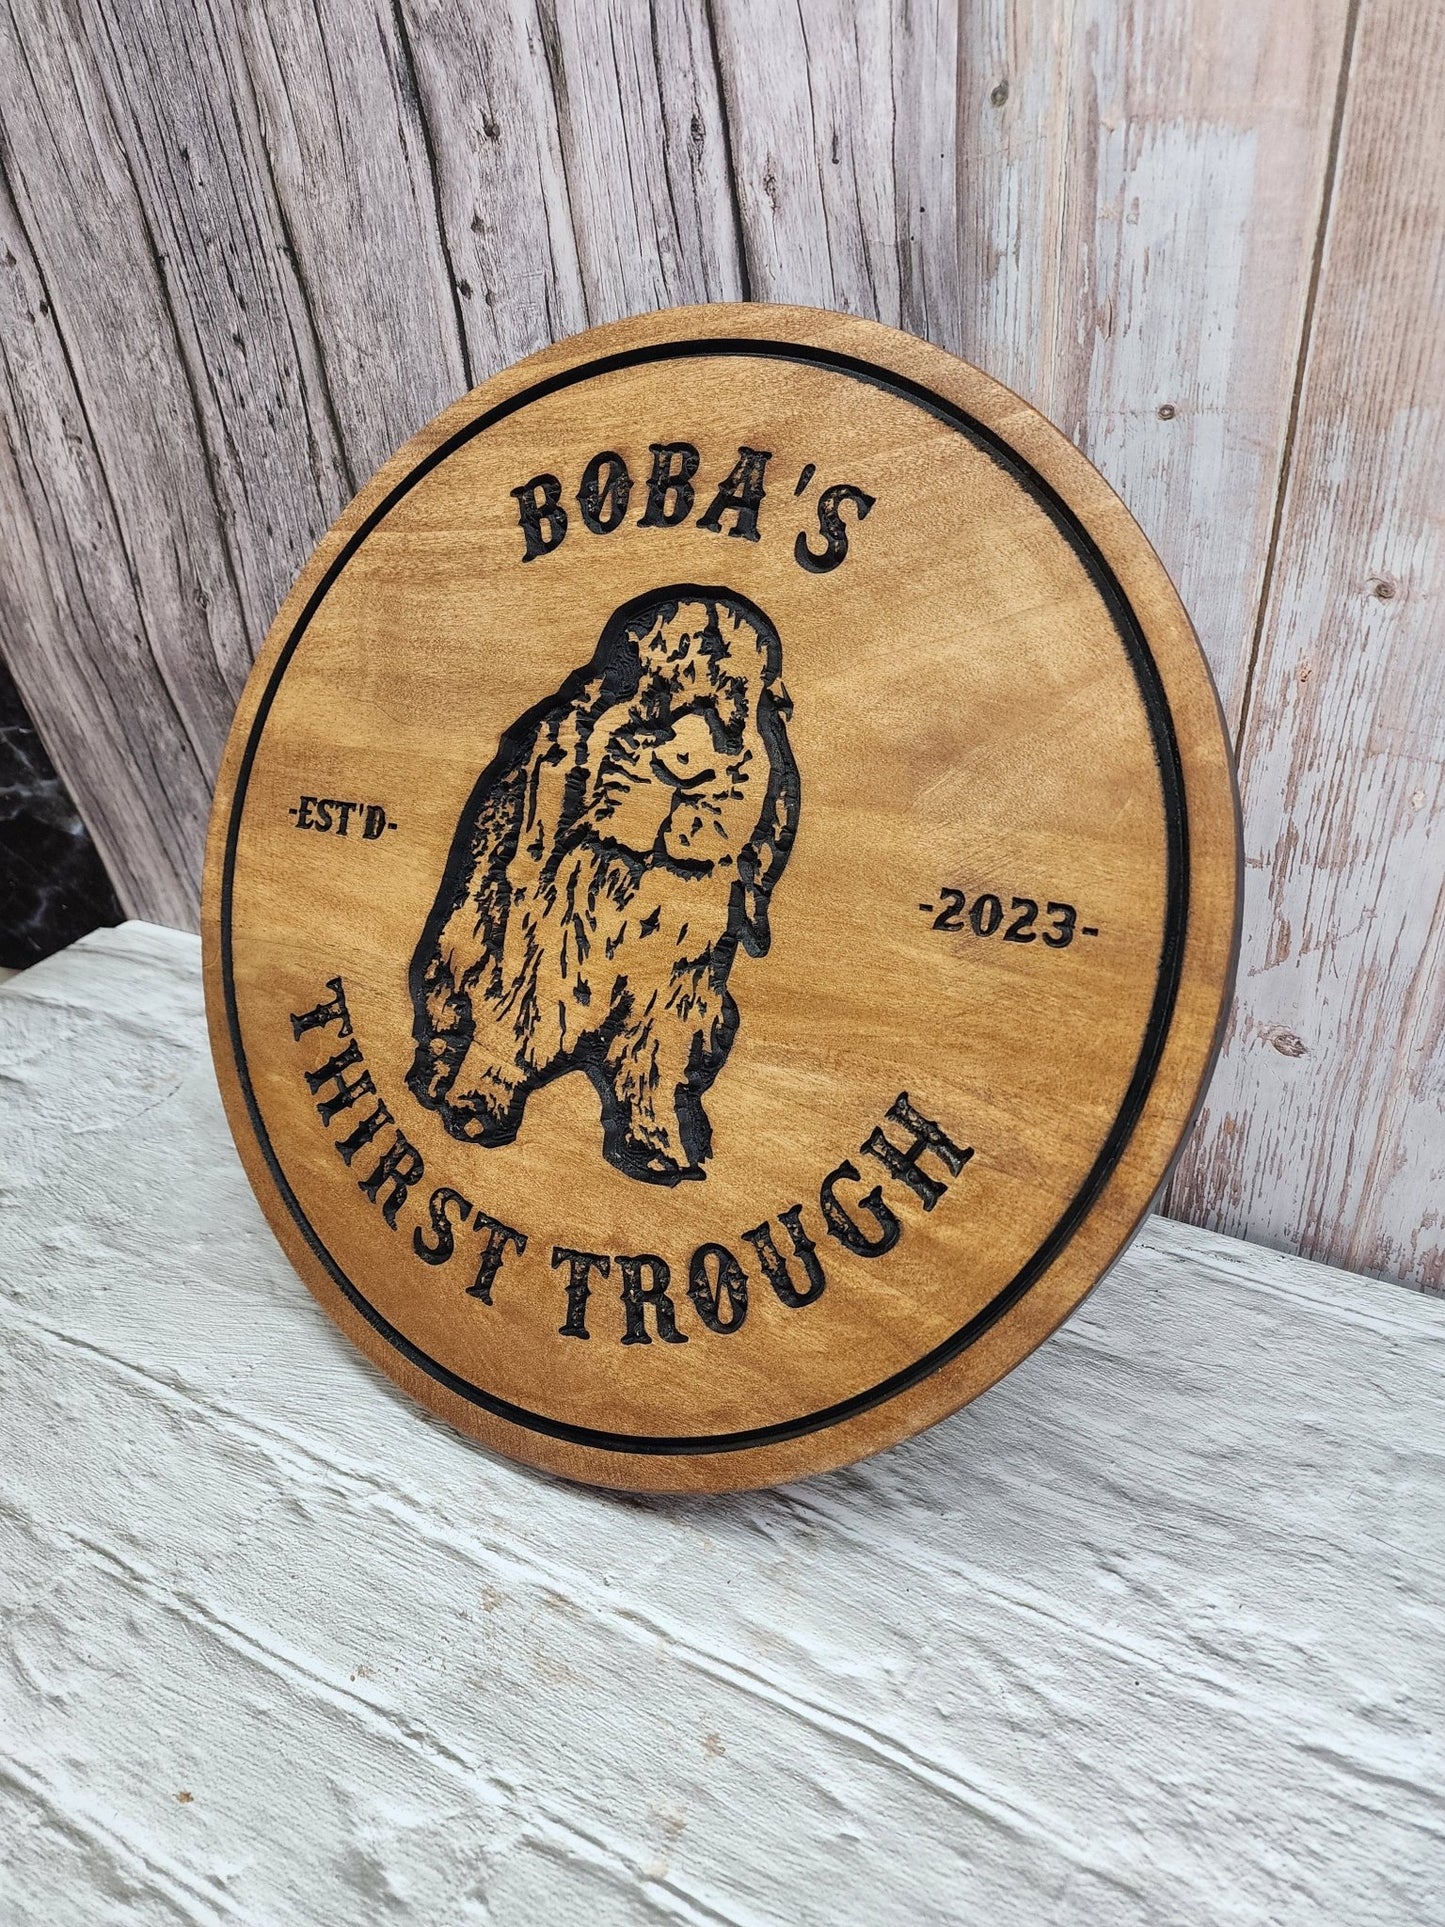 2D Routed Wood Sign for the Home Bar - Bison Peak DesignsWood sign